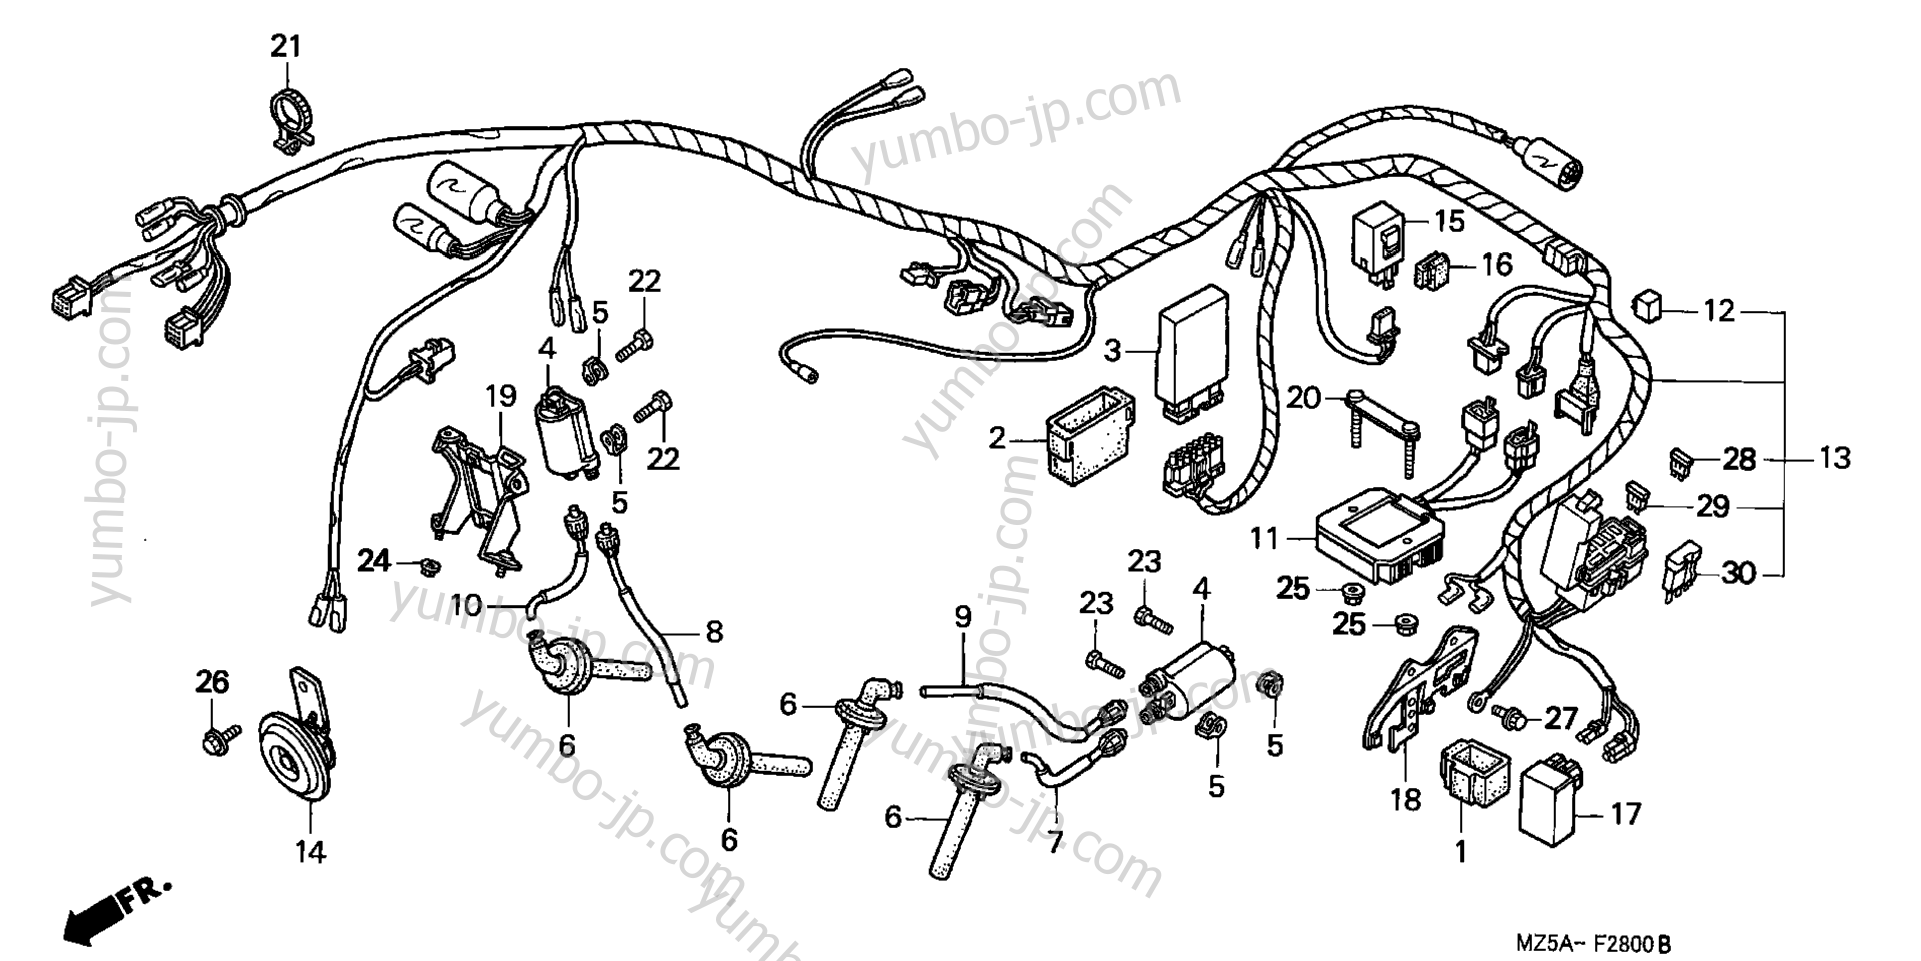 WIRE HARNESS for motorcycles HONDA VF750C2 AC 1999 year